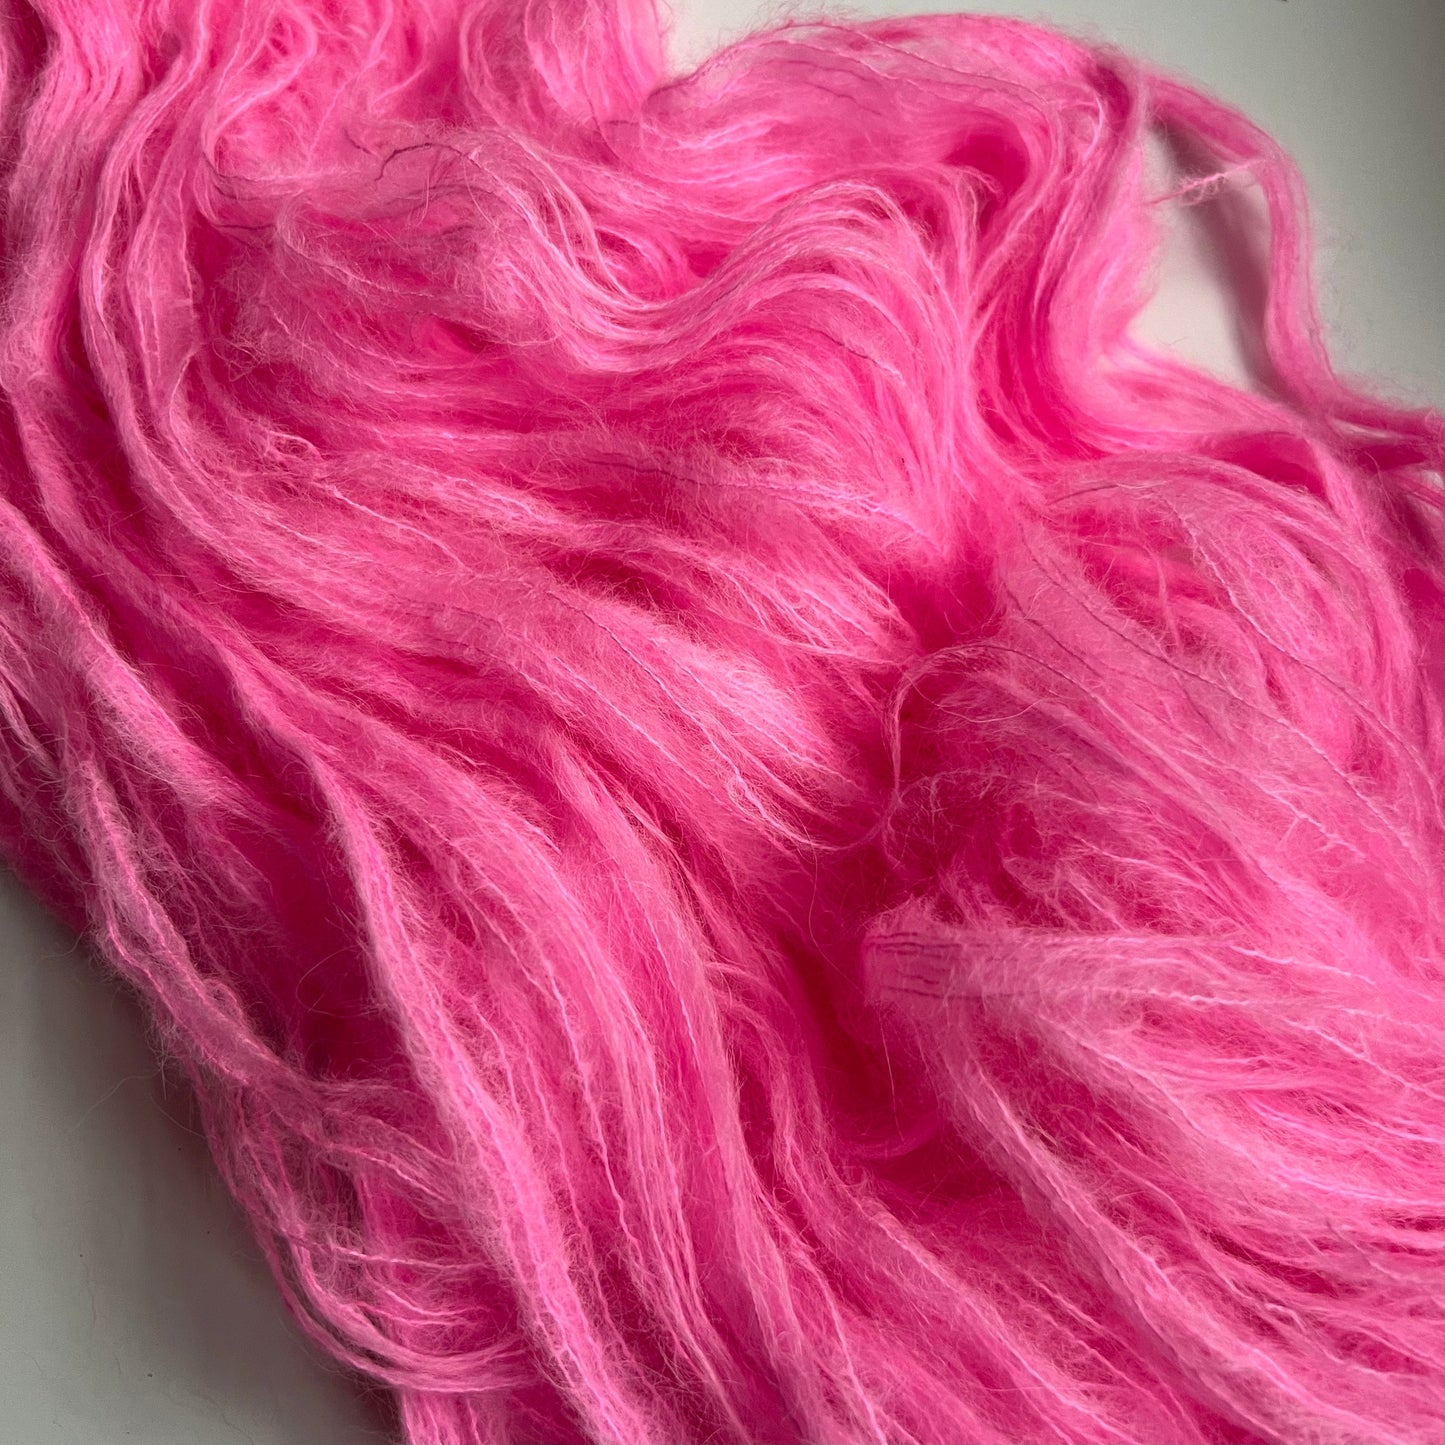 Load image into Gallery viewer, Baby Suri Alpaca Hand Dyed Pink Yarn
